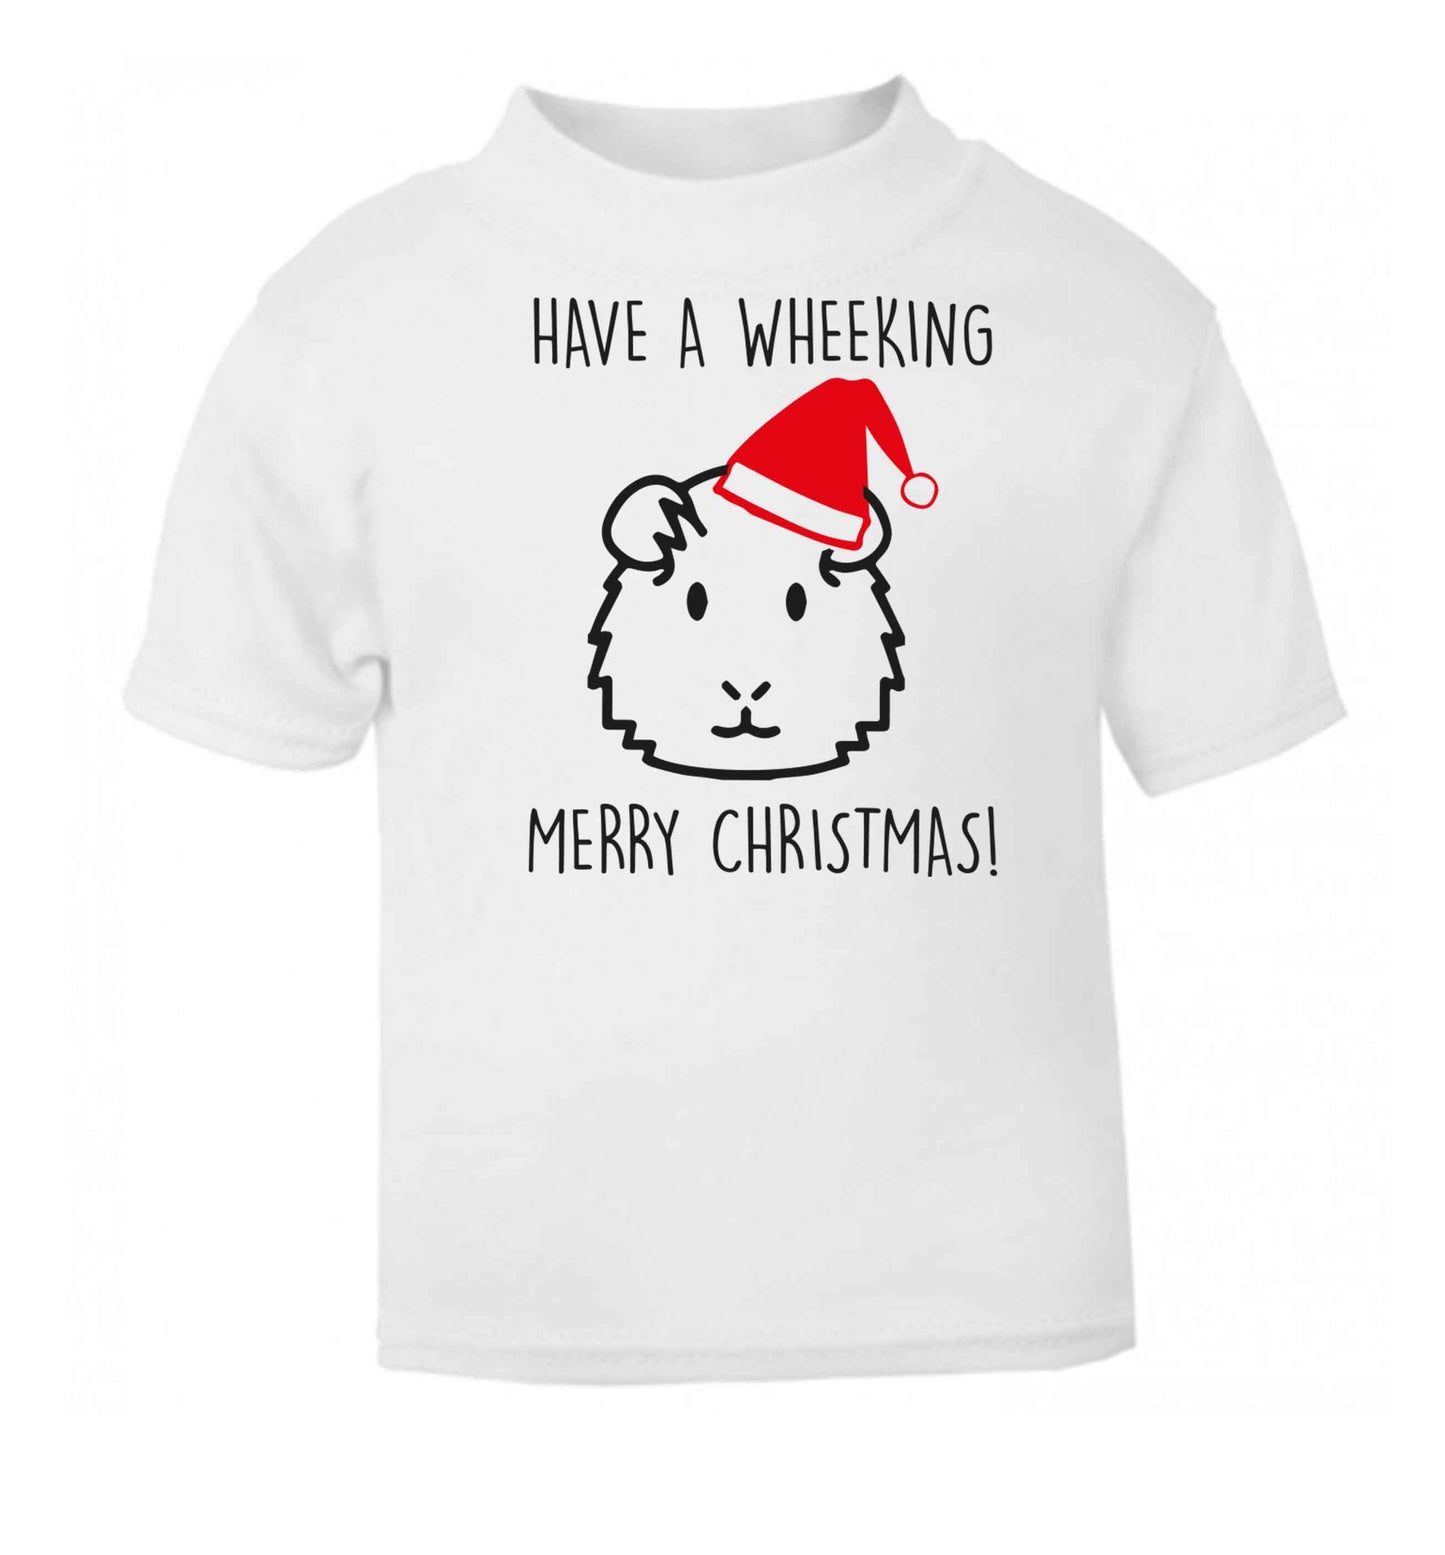 Have a wheeking merry Christmas white baby toddler Tshirt 2 Years